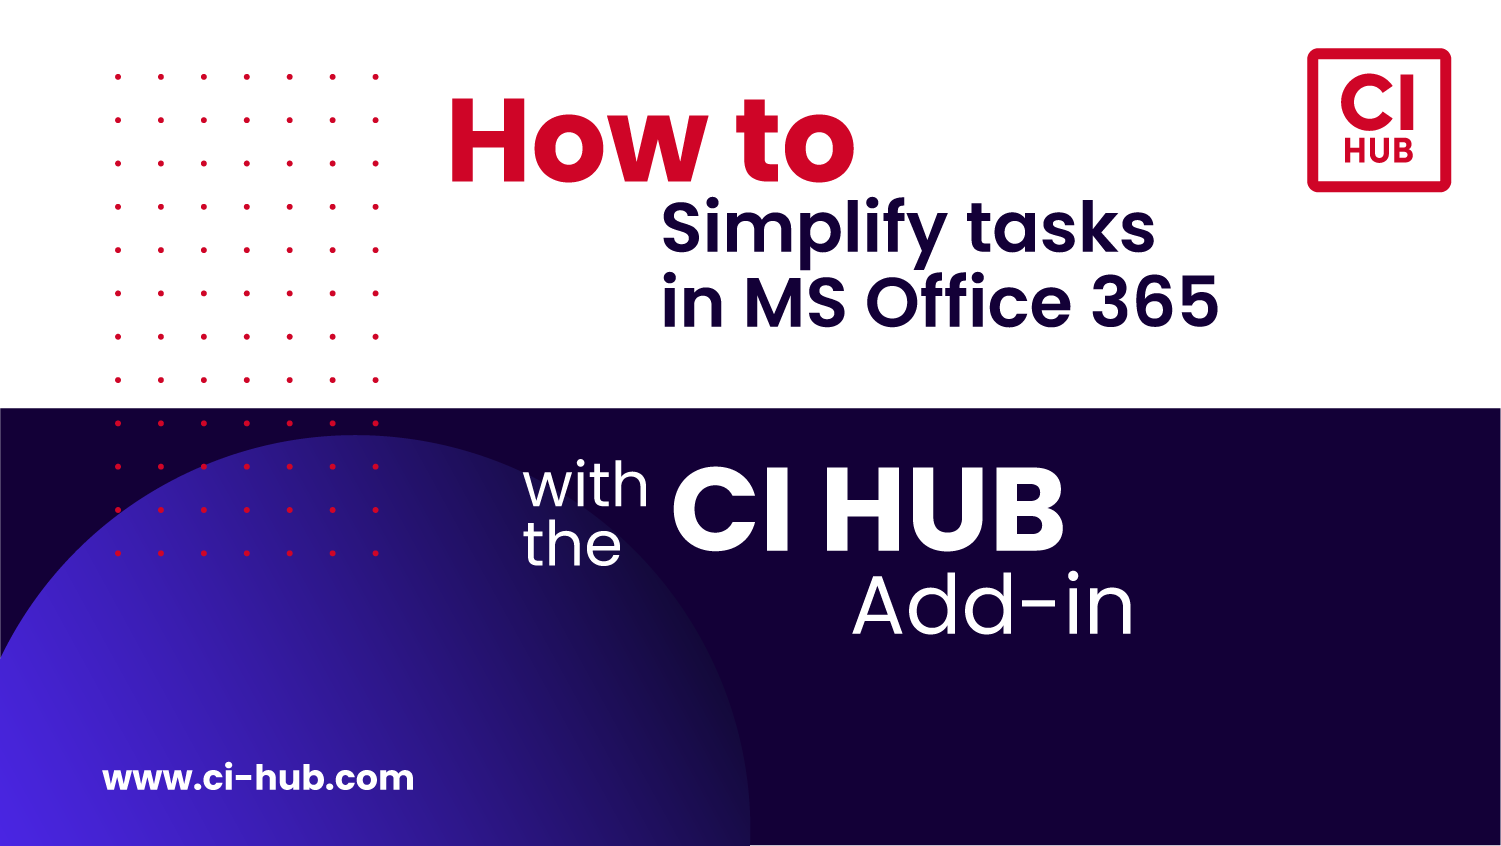 Simplify tasks in MS Office 365 with the CI HUB...